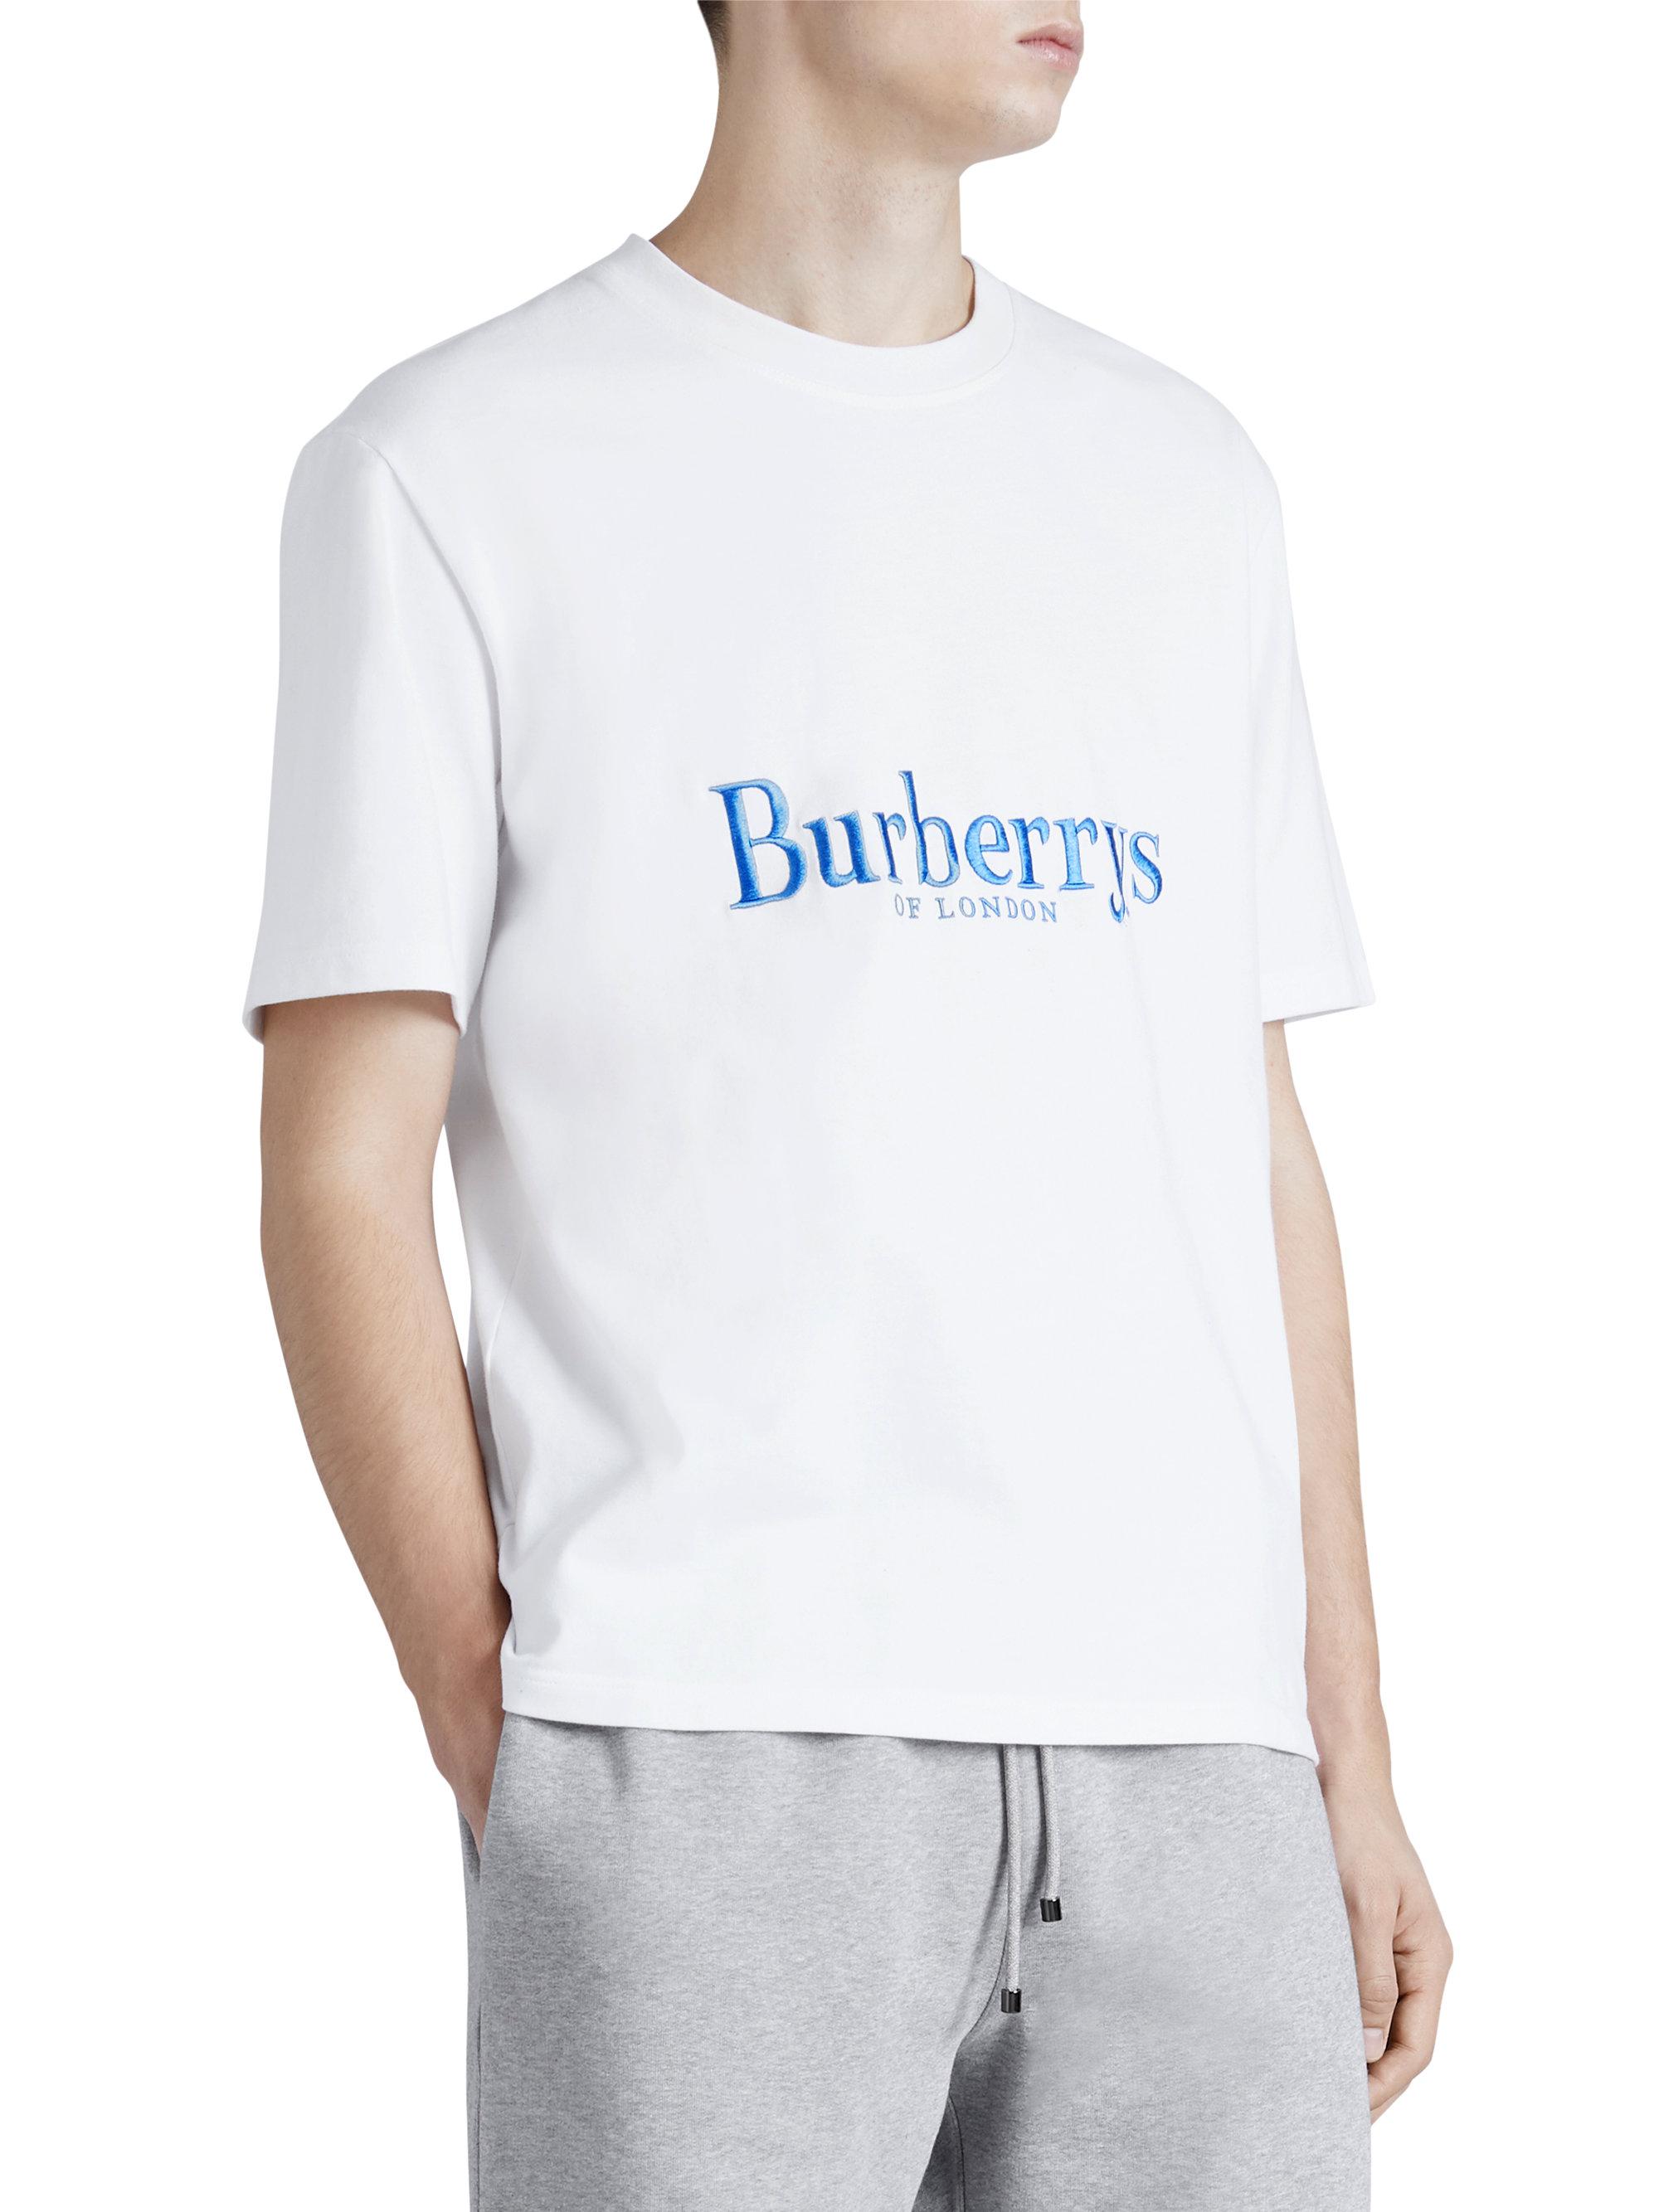 Burberry Cotton Reissued 1994 Classic T-shirt in White for Men - Lyst